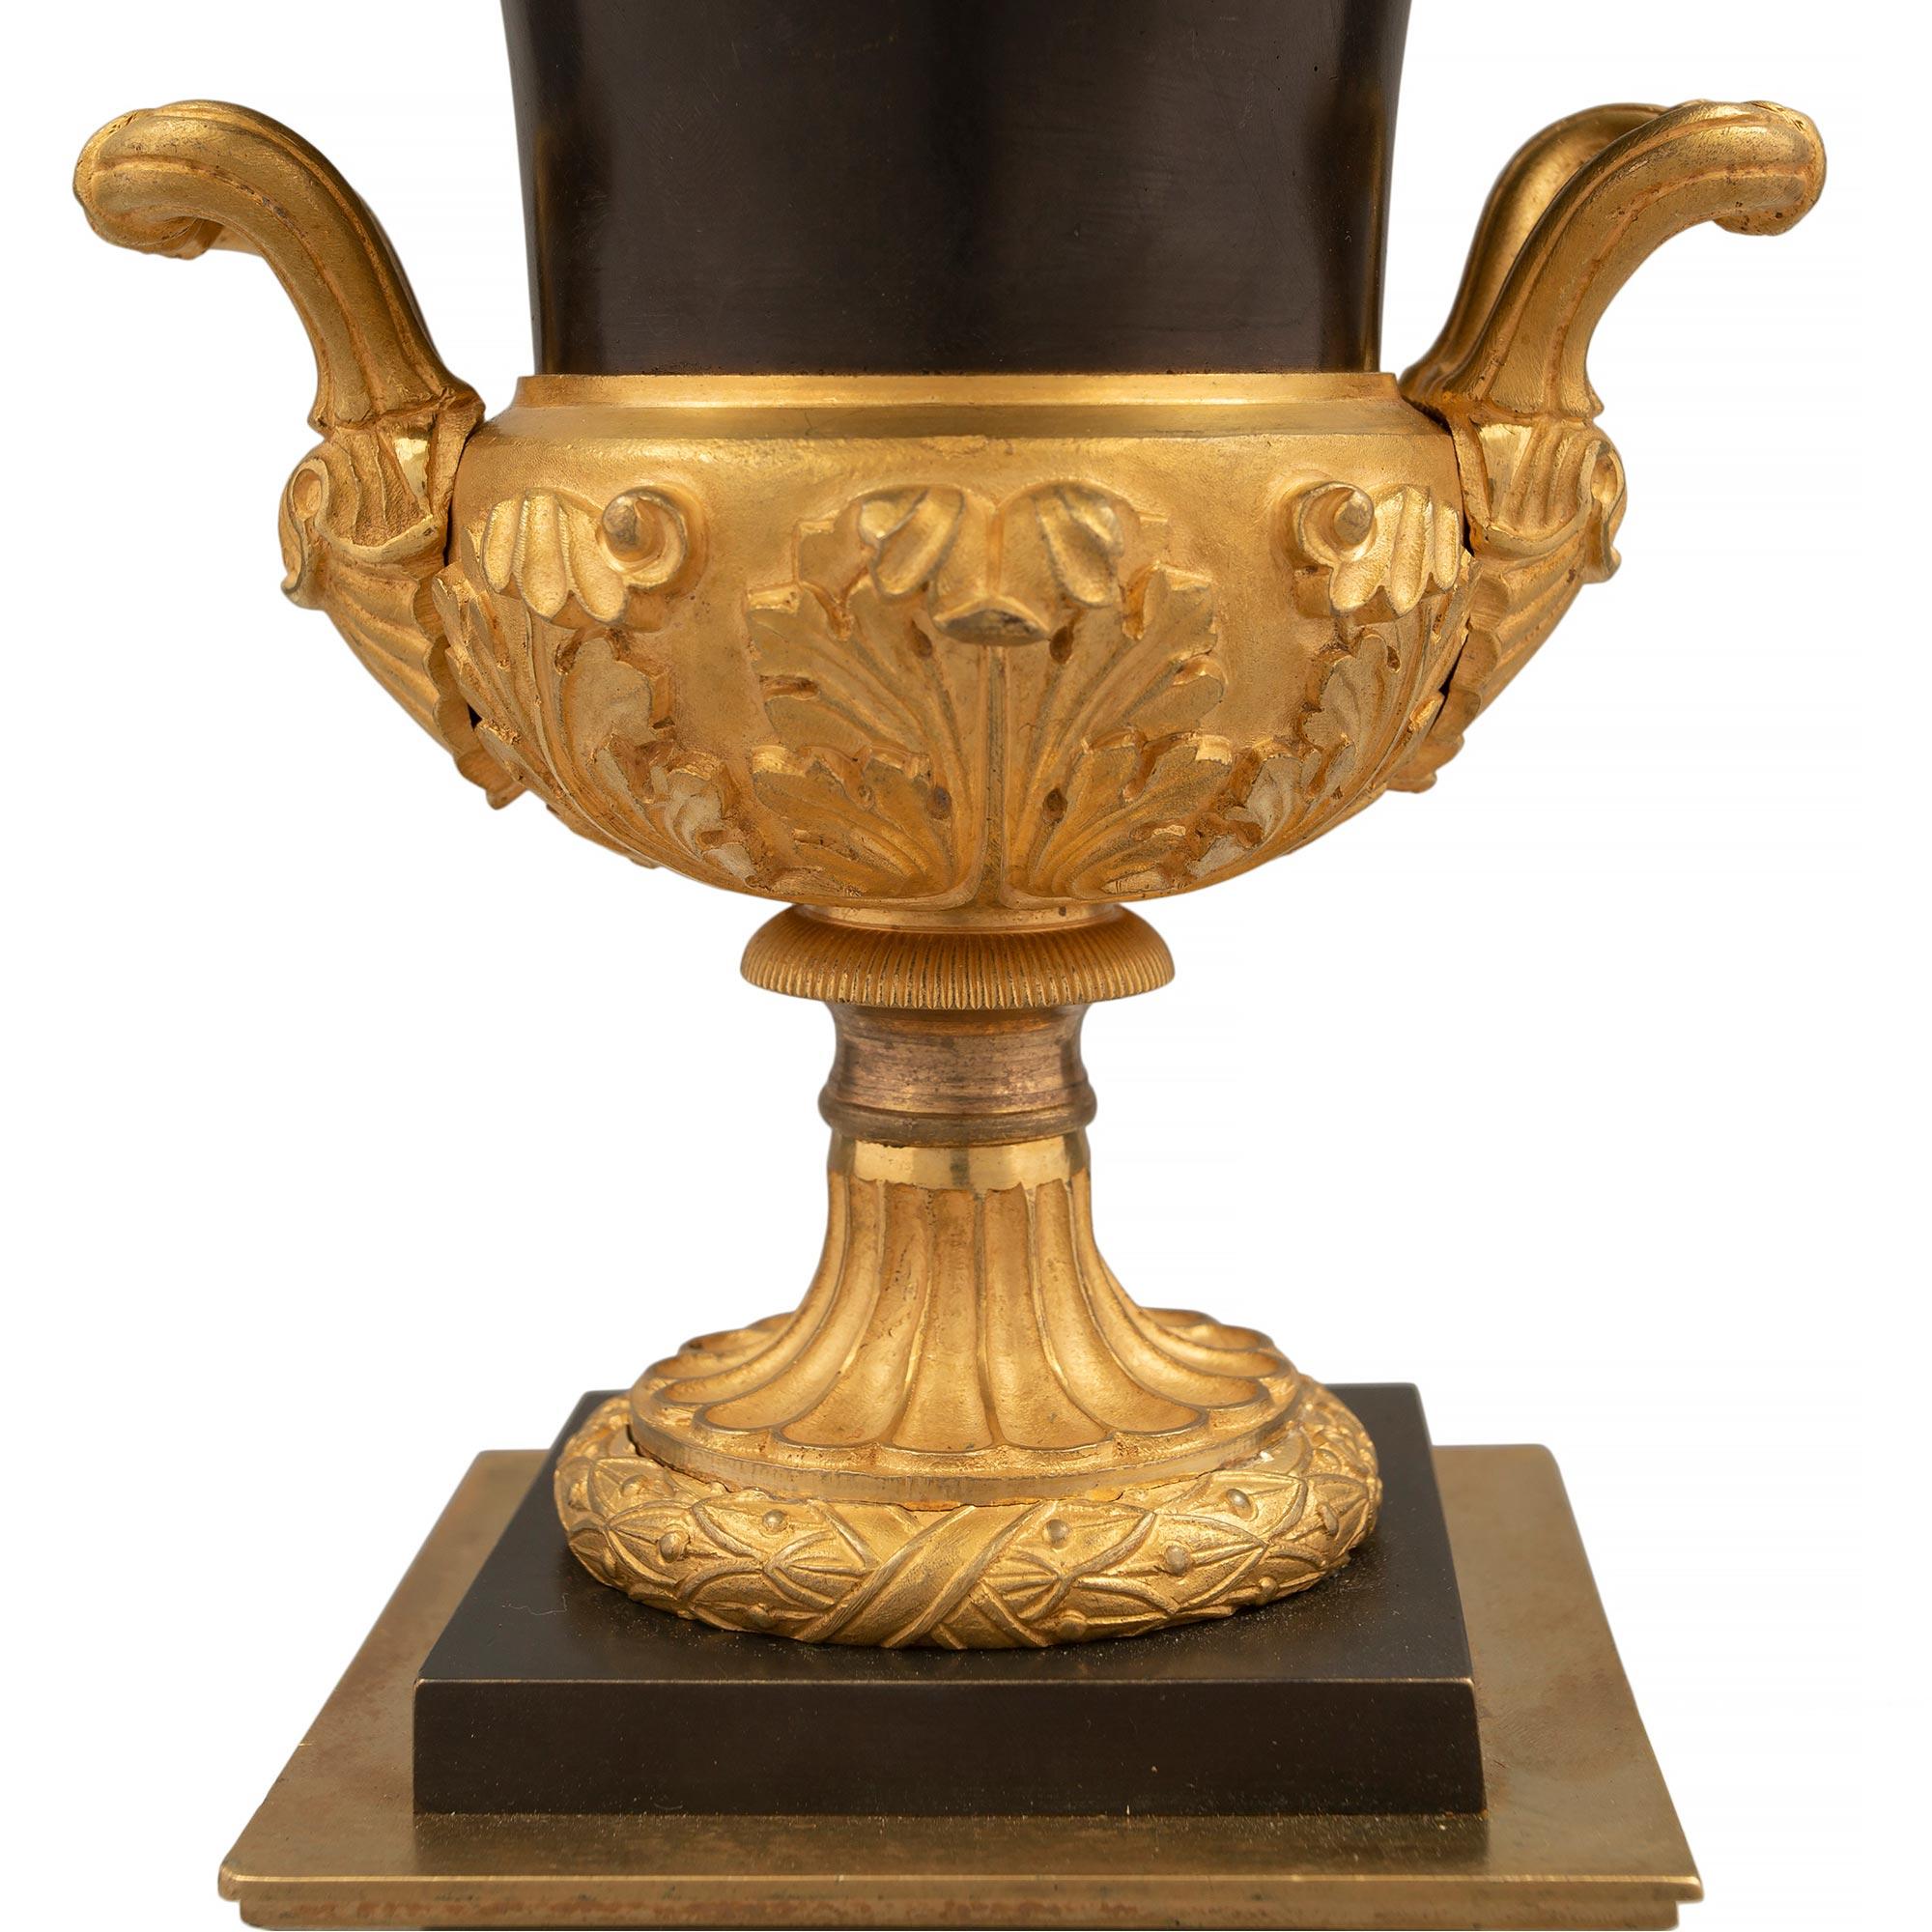 Pair of French Mid-19th Century Patinated Bronze & Ormolu Neoclassical St. Urns For Sale 2